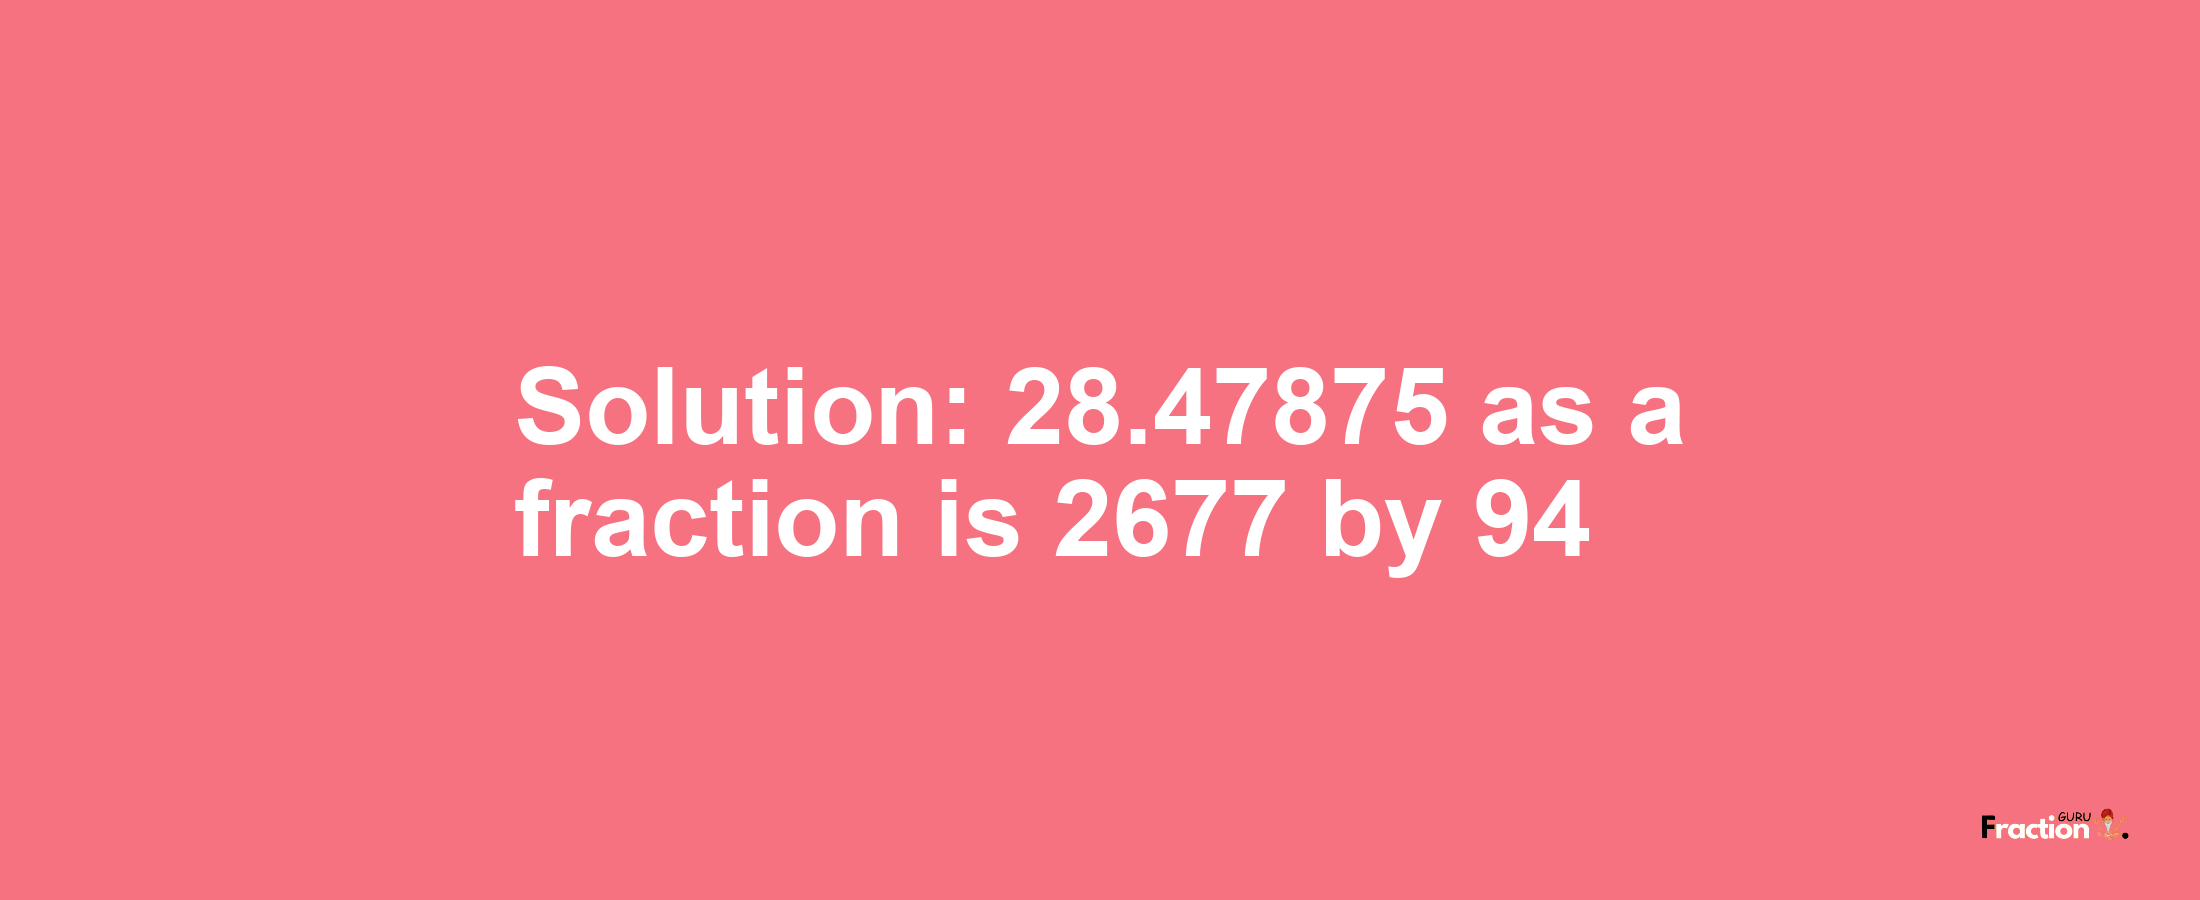 Solution:28.47875 as a fraction is 2677/94